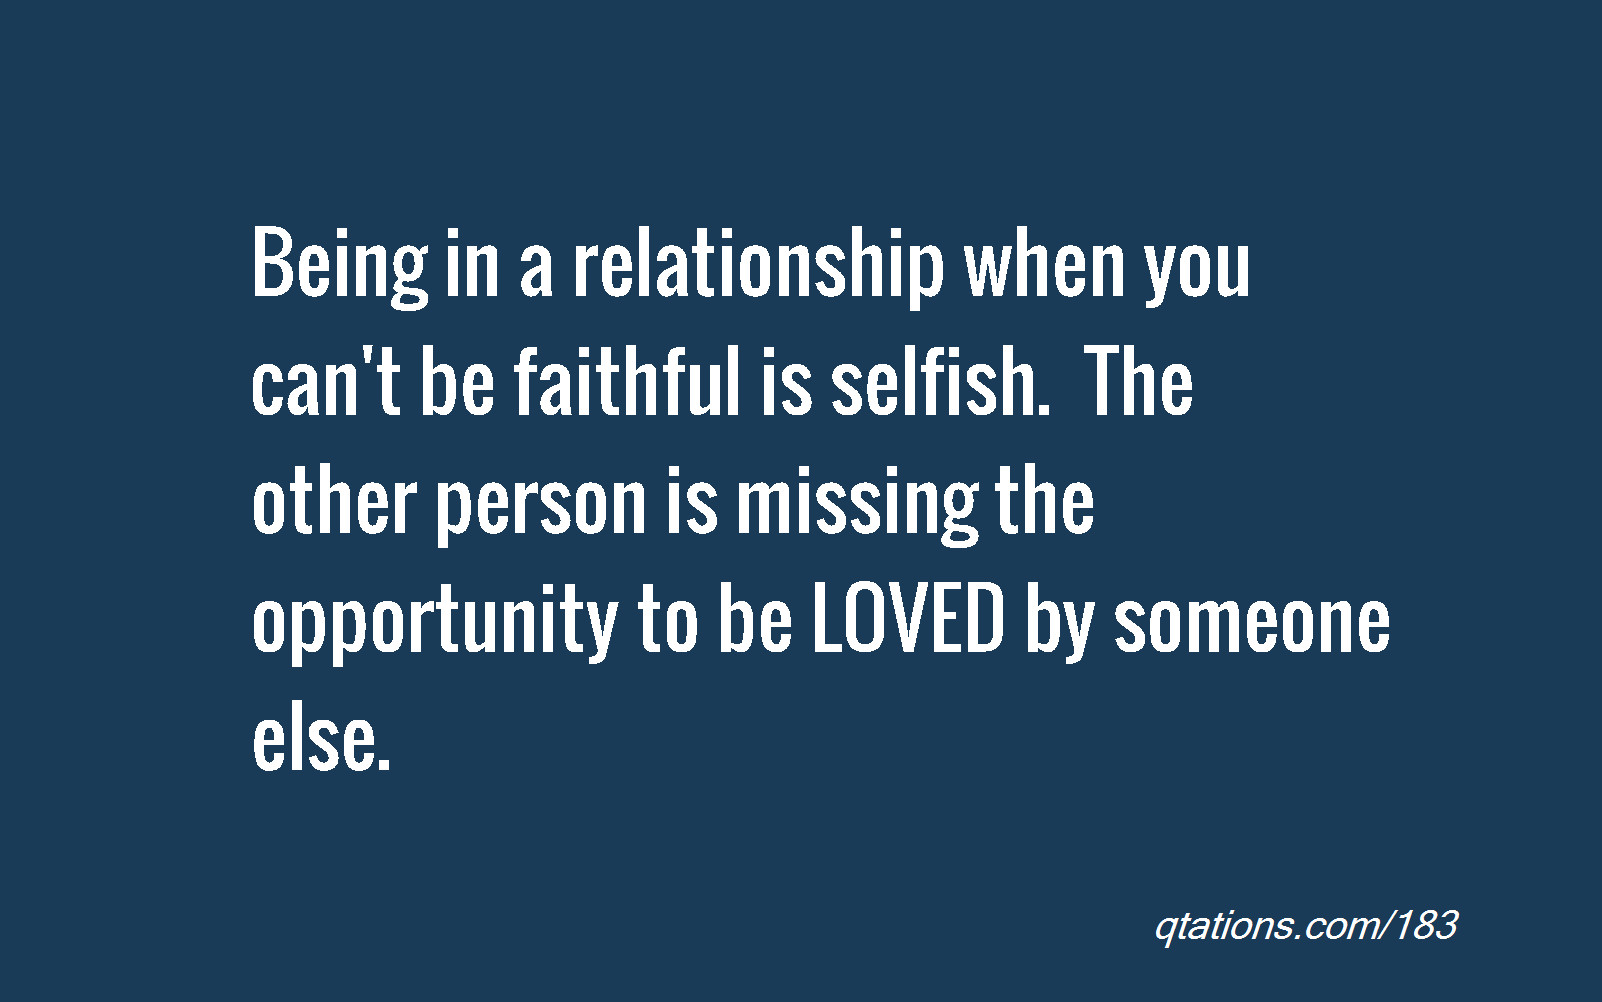 Quotes About Being In A Relationship
 Quotes About Faithful Relationships QuotesGram